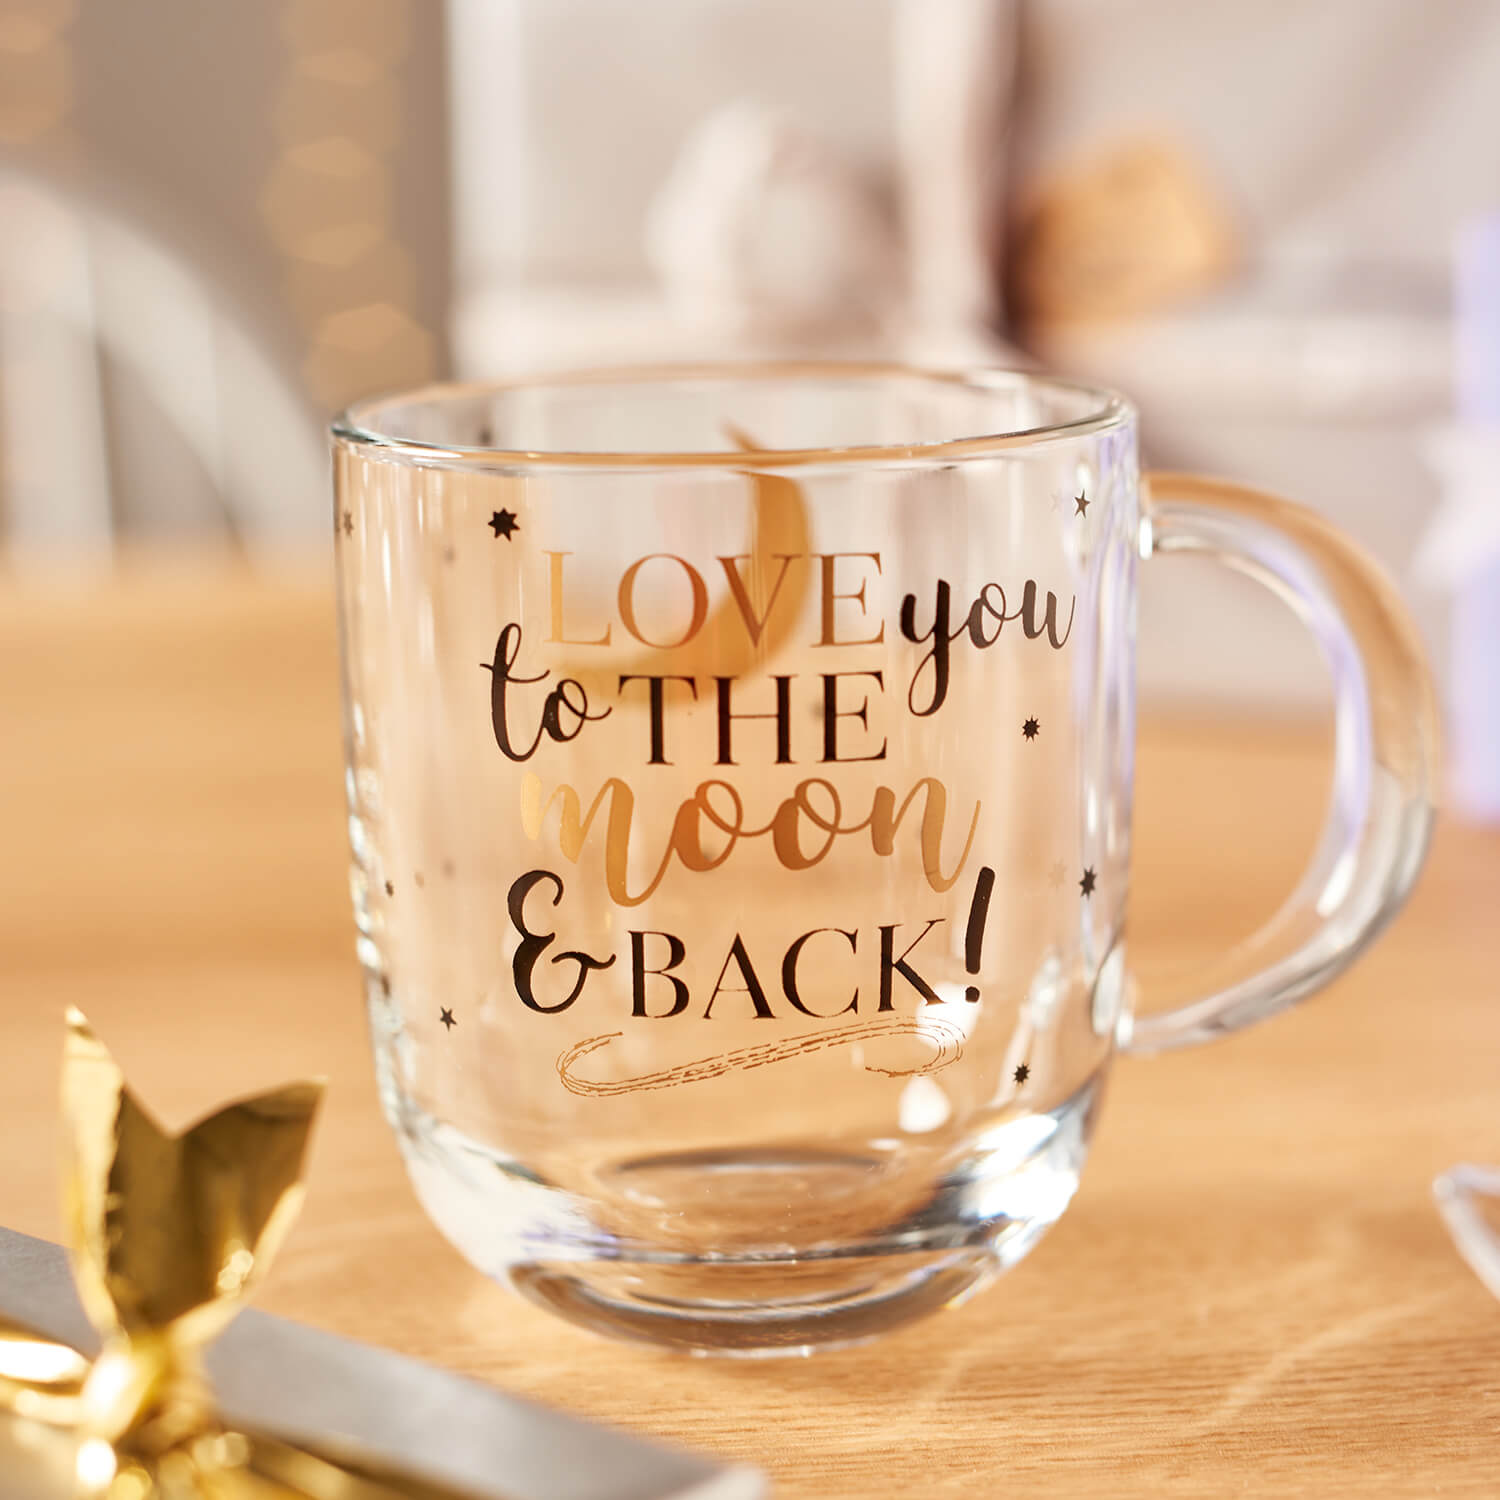 Tasse 400ml 'Love you to the moon and back' EMOZIONE